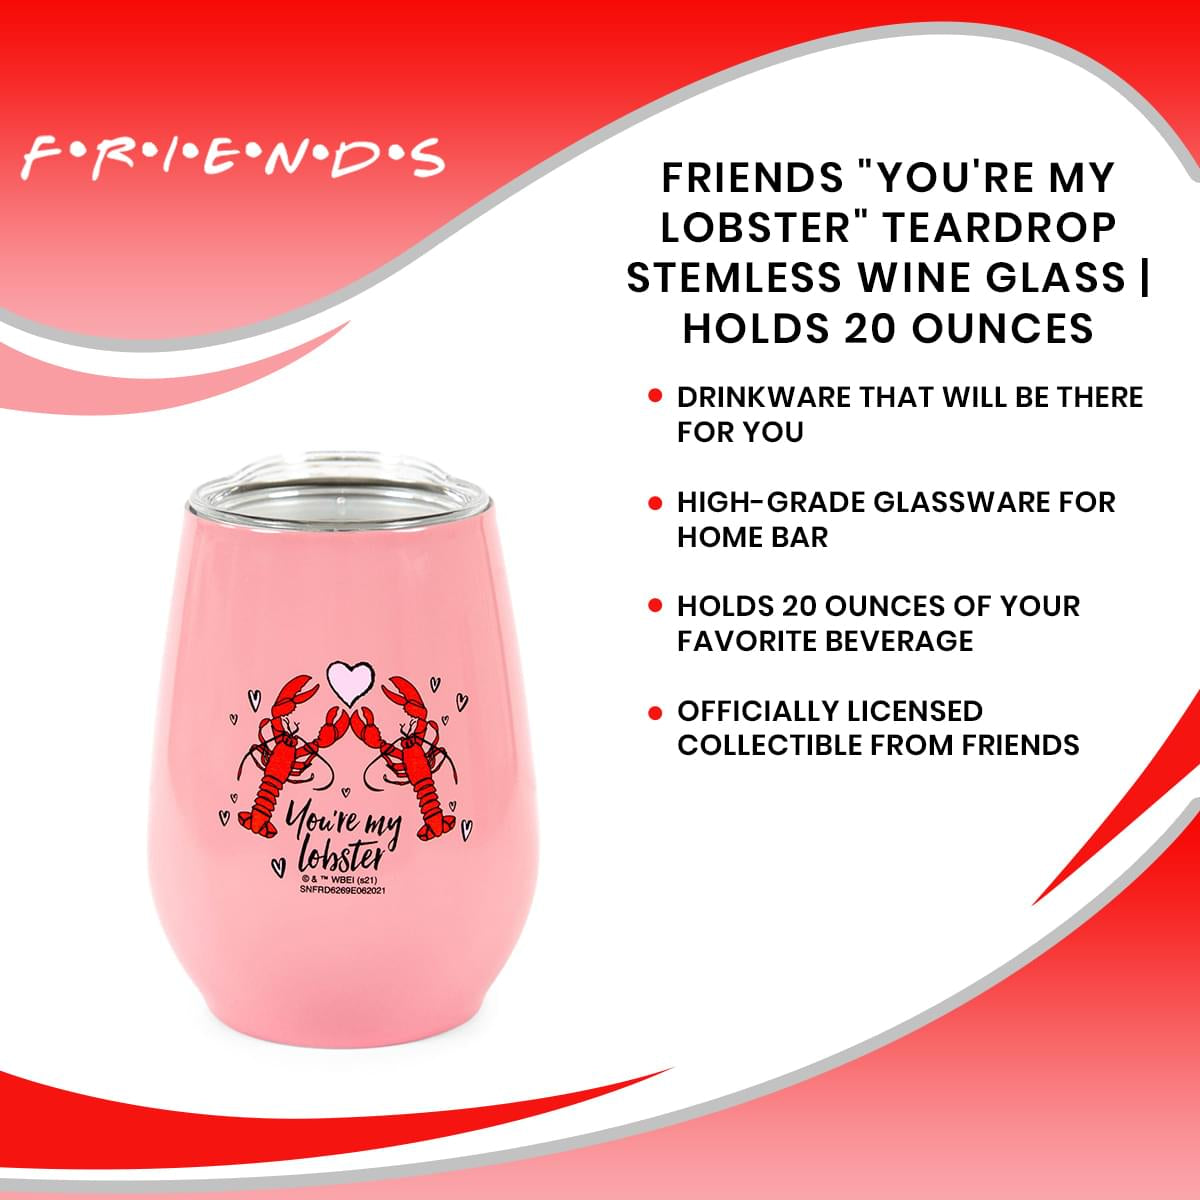 Friends "You're My Lobster" Stainless Steel Tumbler with Lid | Holds 10 Ounces